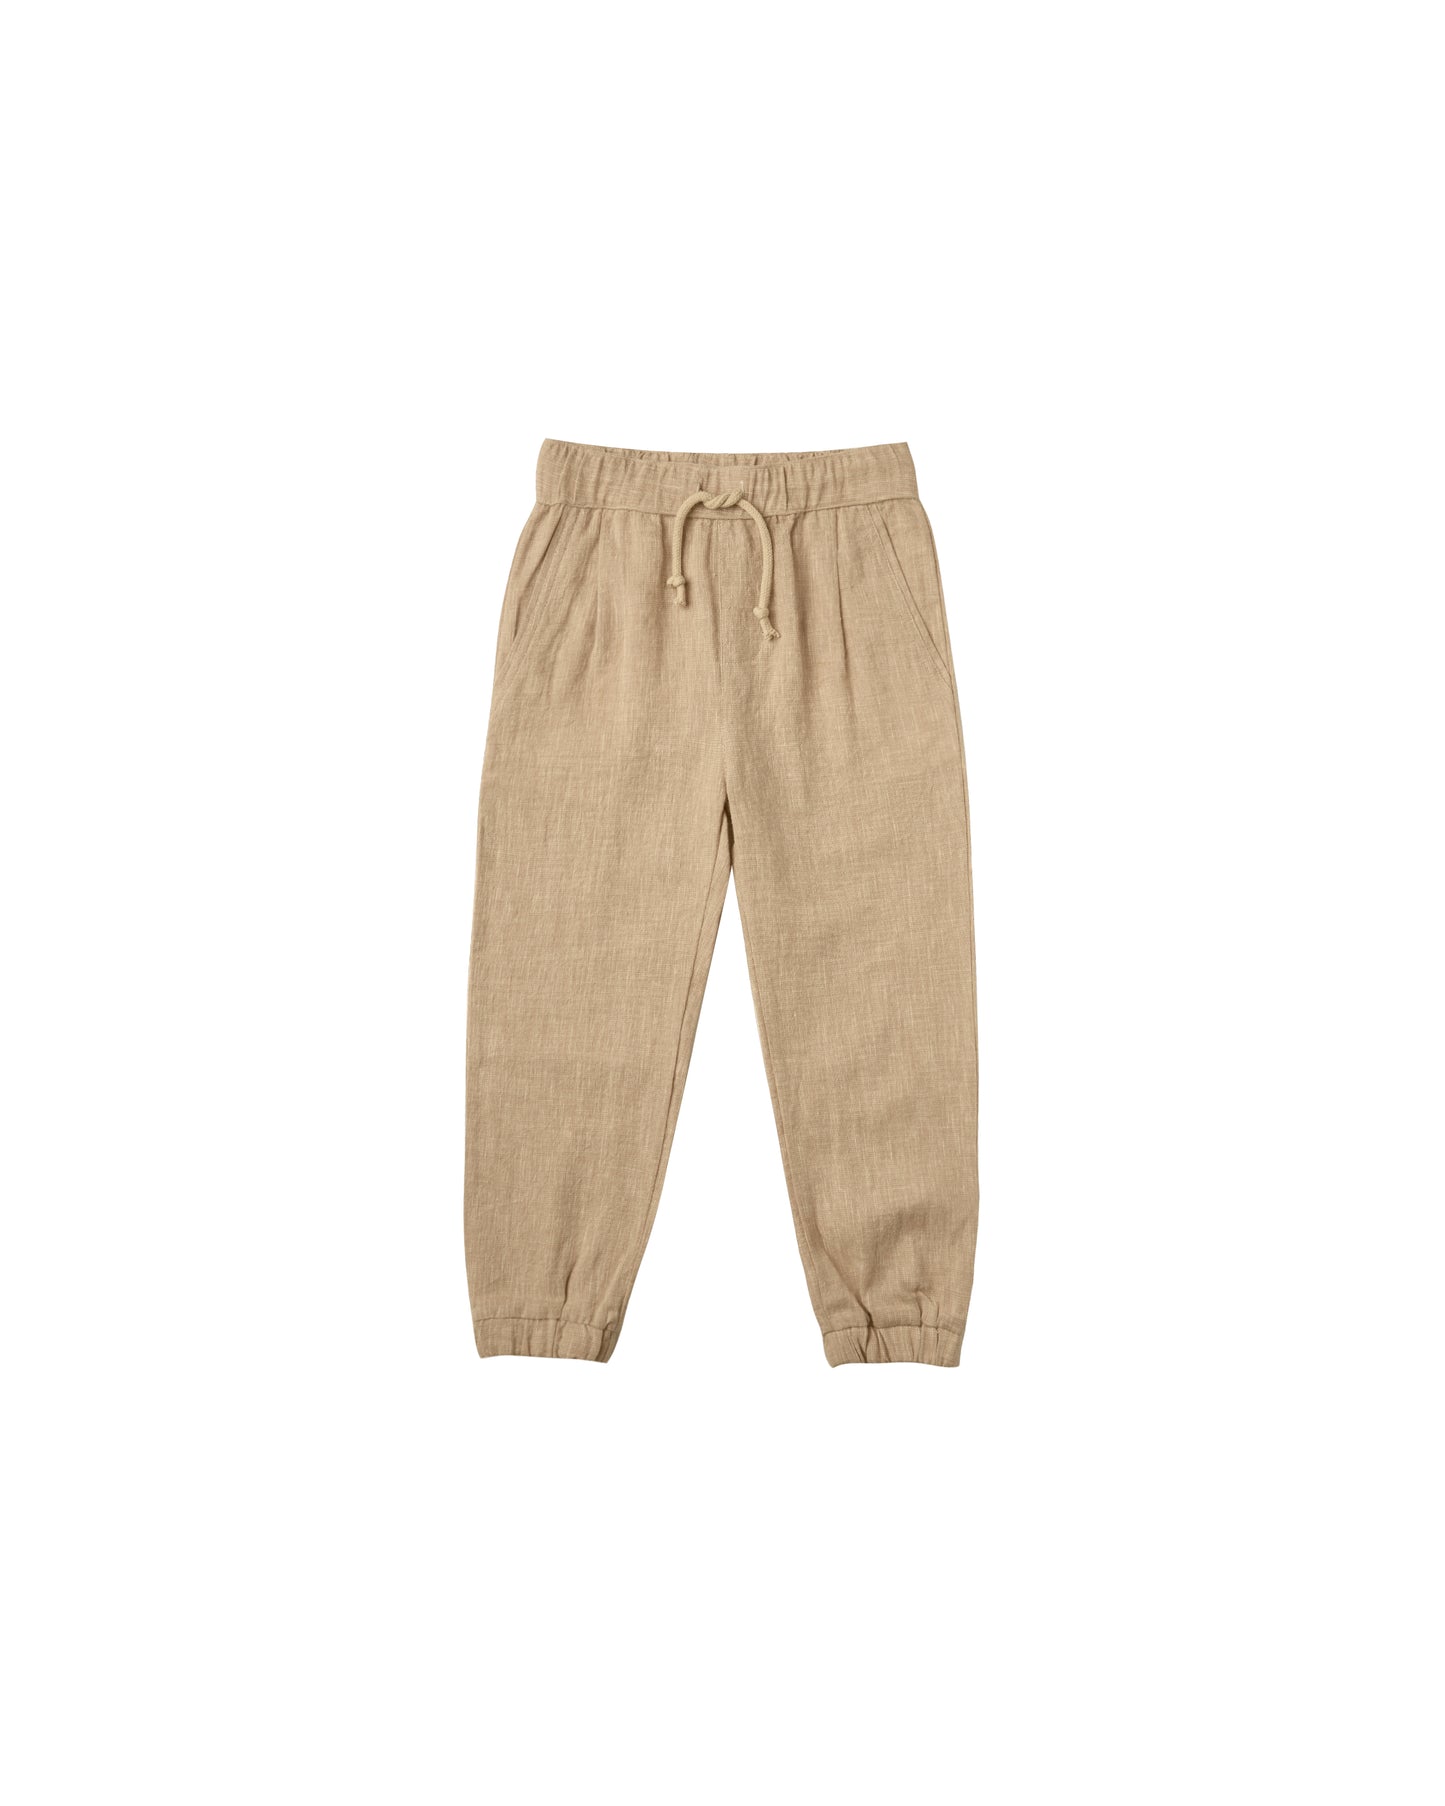 Rylee + Cru Beau Pant - Available in Multiple Colors